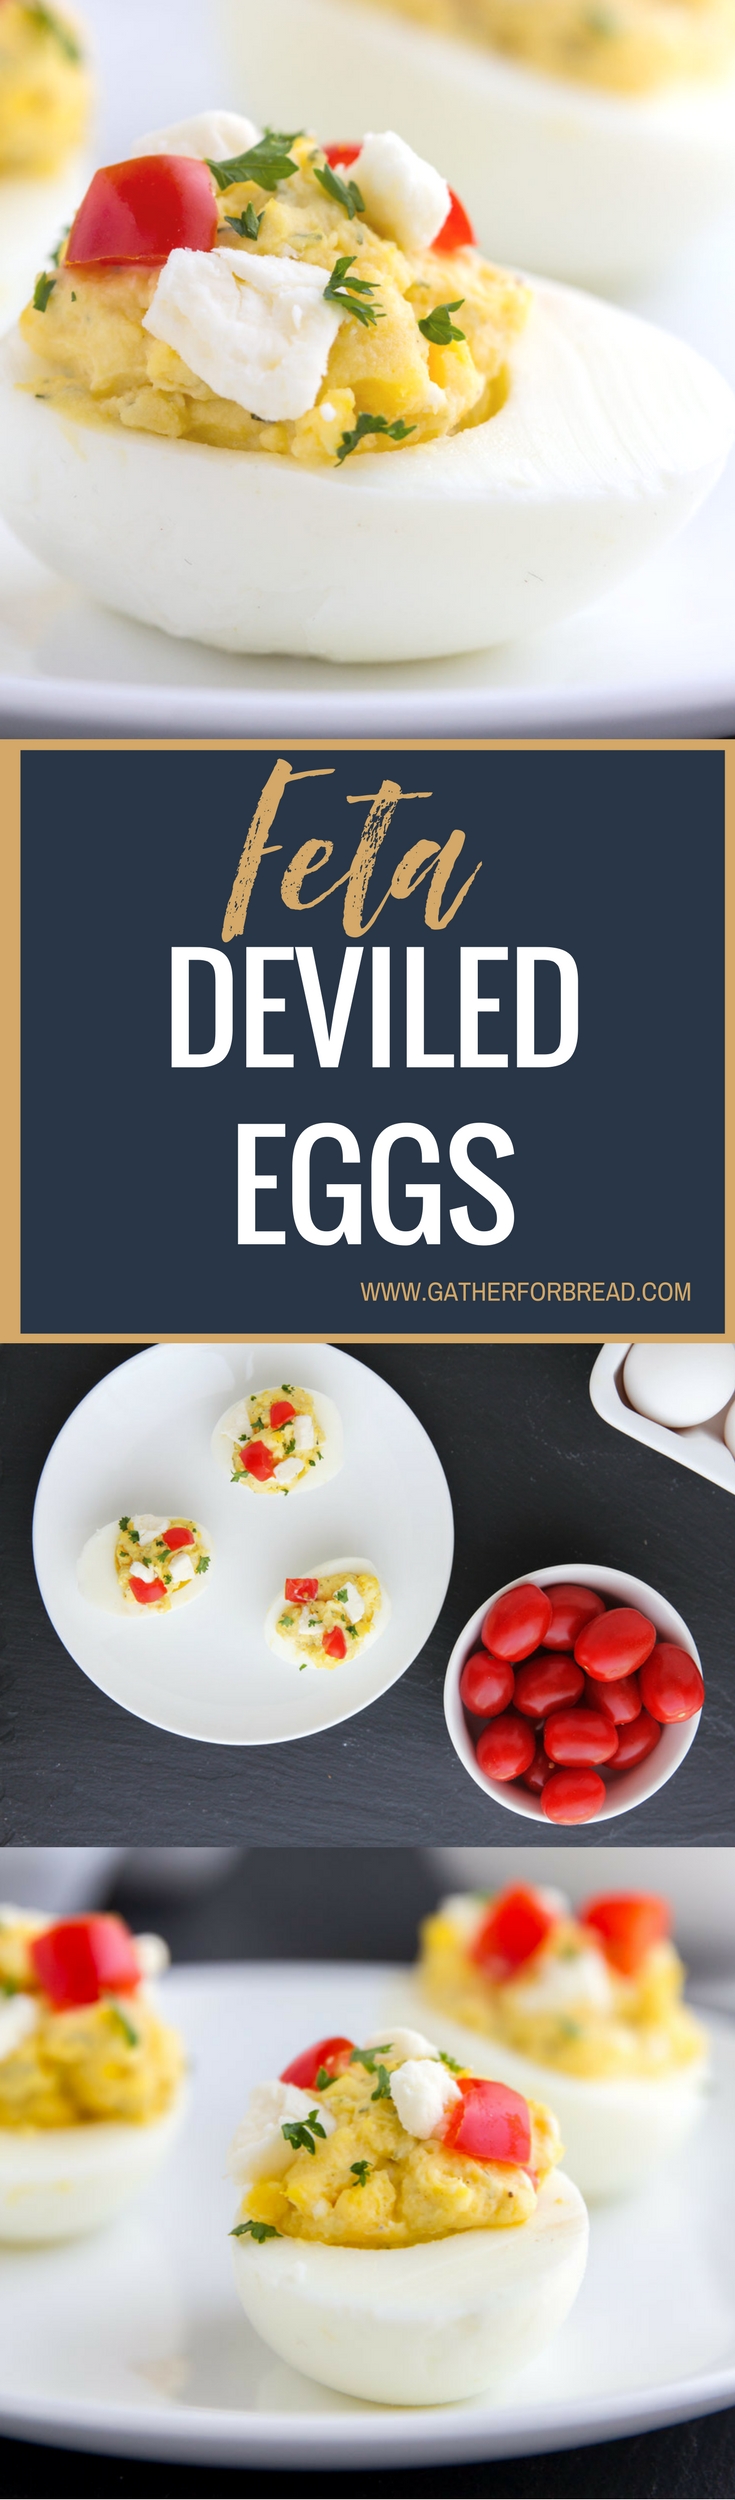 Feta Deviled Eggs - Healthier deviled eggs made with Greek yogurt, Feta cheese and dill for a savory appetizer that's ready in minutes. These Greek style eggs with herbs are delicious!